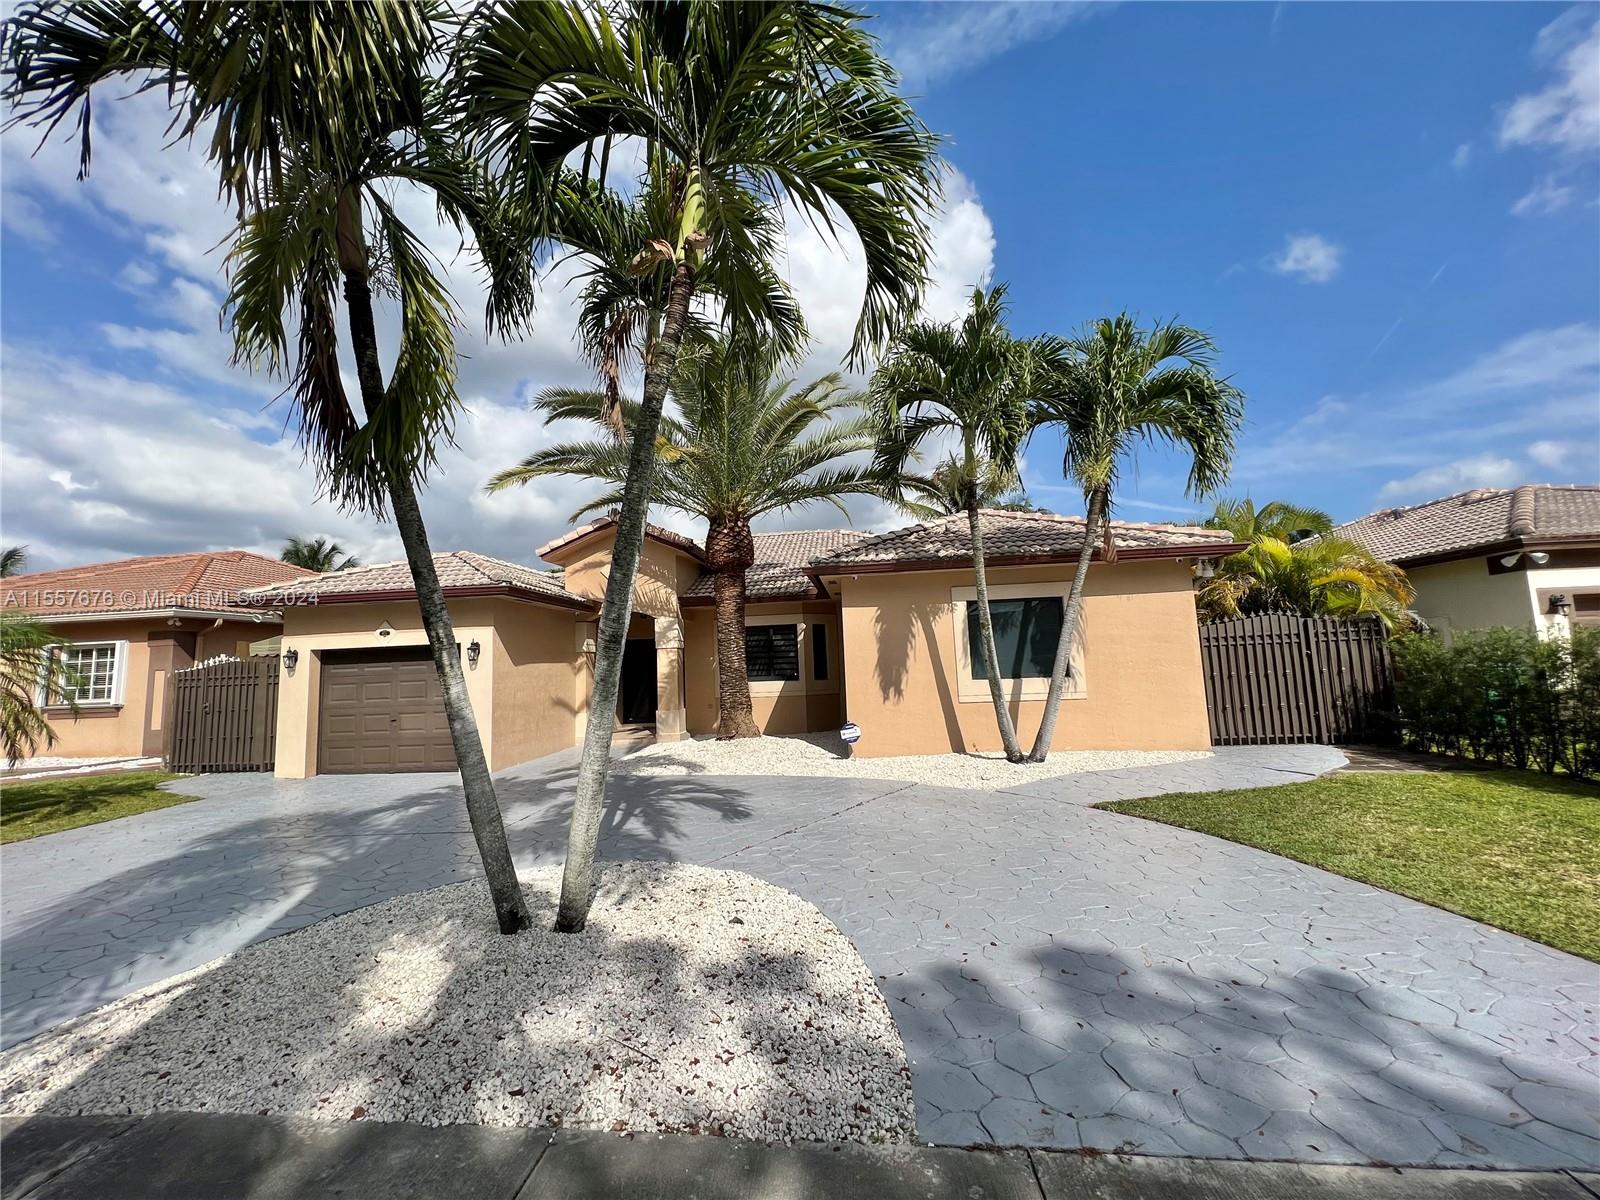 Property for Sale at 16711 Nw 89th Pl, Miami Lakes, Miami-Dade County, Florida - Bedrooms: 3 
Bathrooms: 2  - $700,000